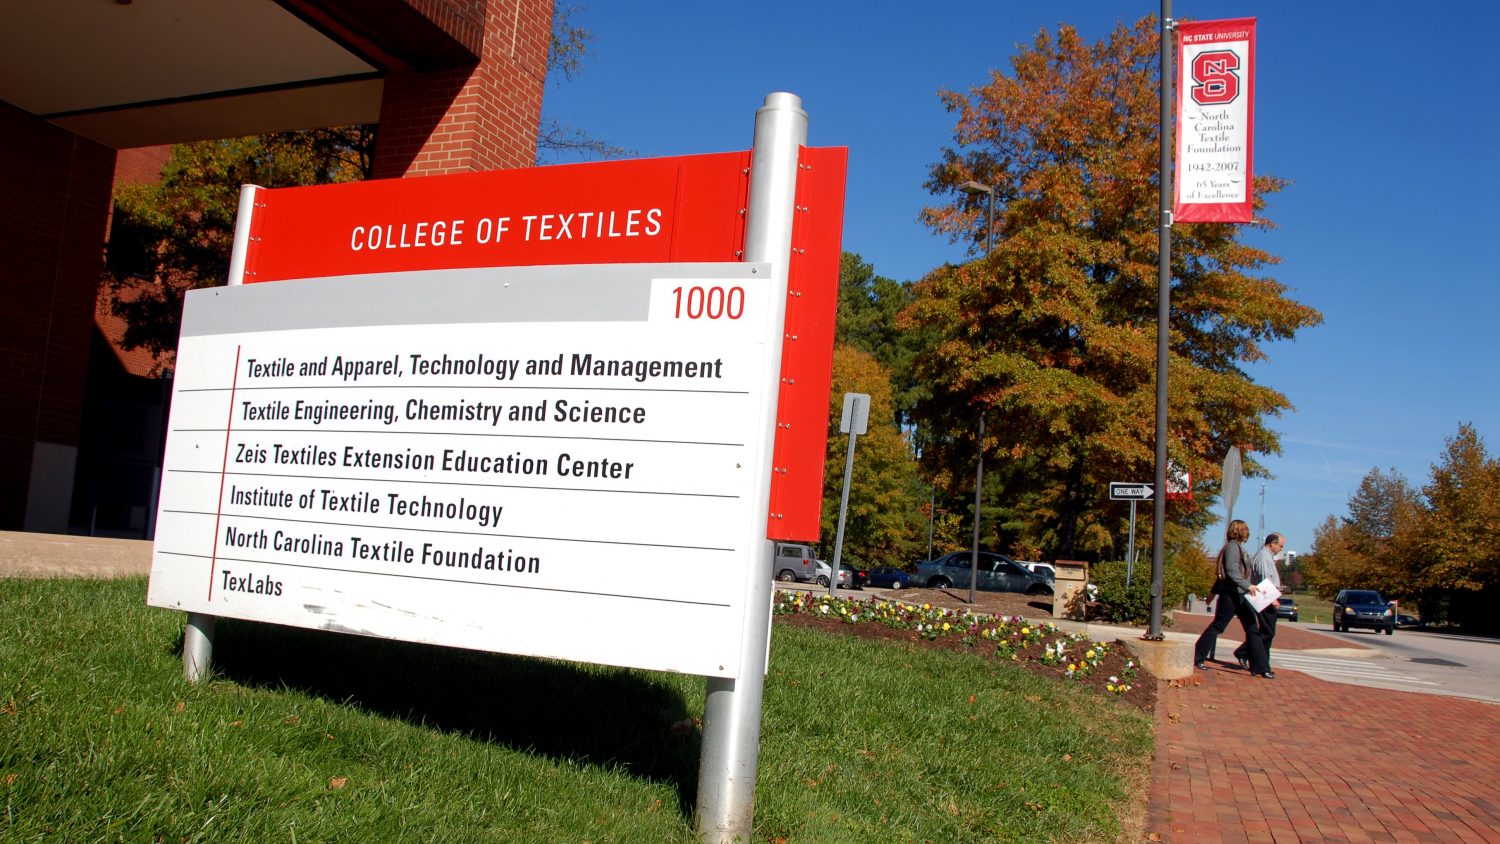 the exterior building sign for the College of Textiles.